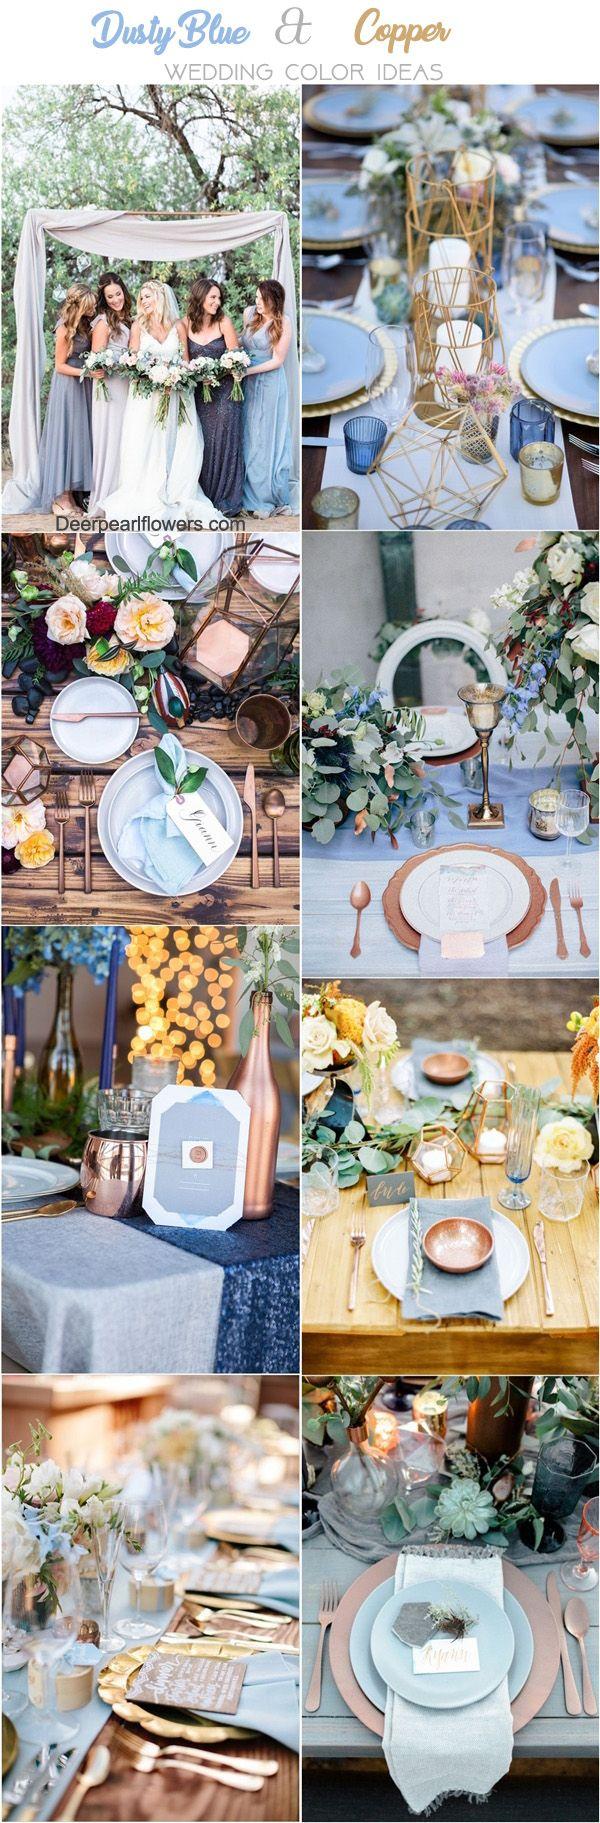 Wedding - Top 20 Dusty Blue And Copper Wedding Color Ideas